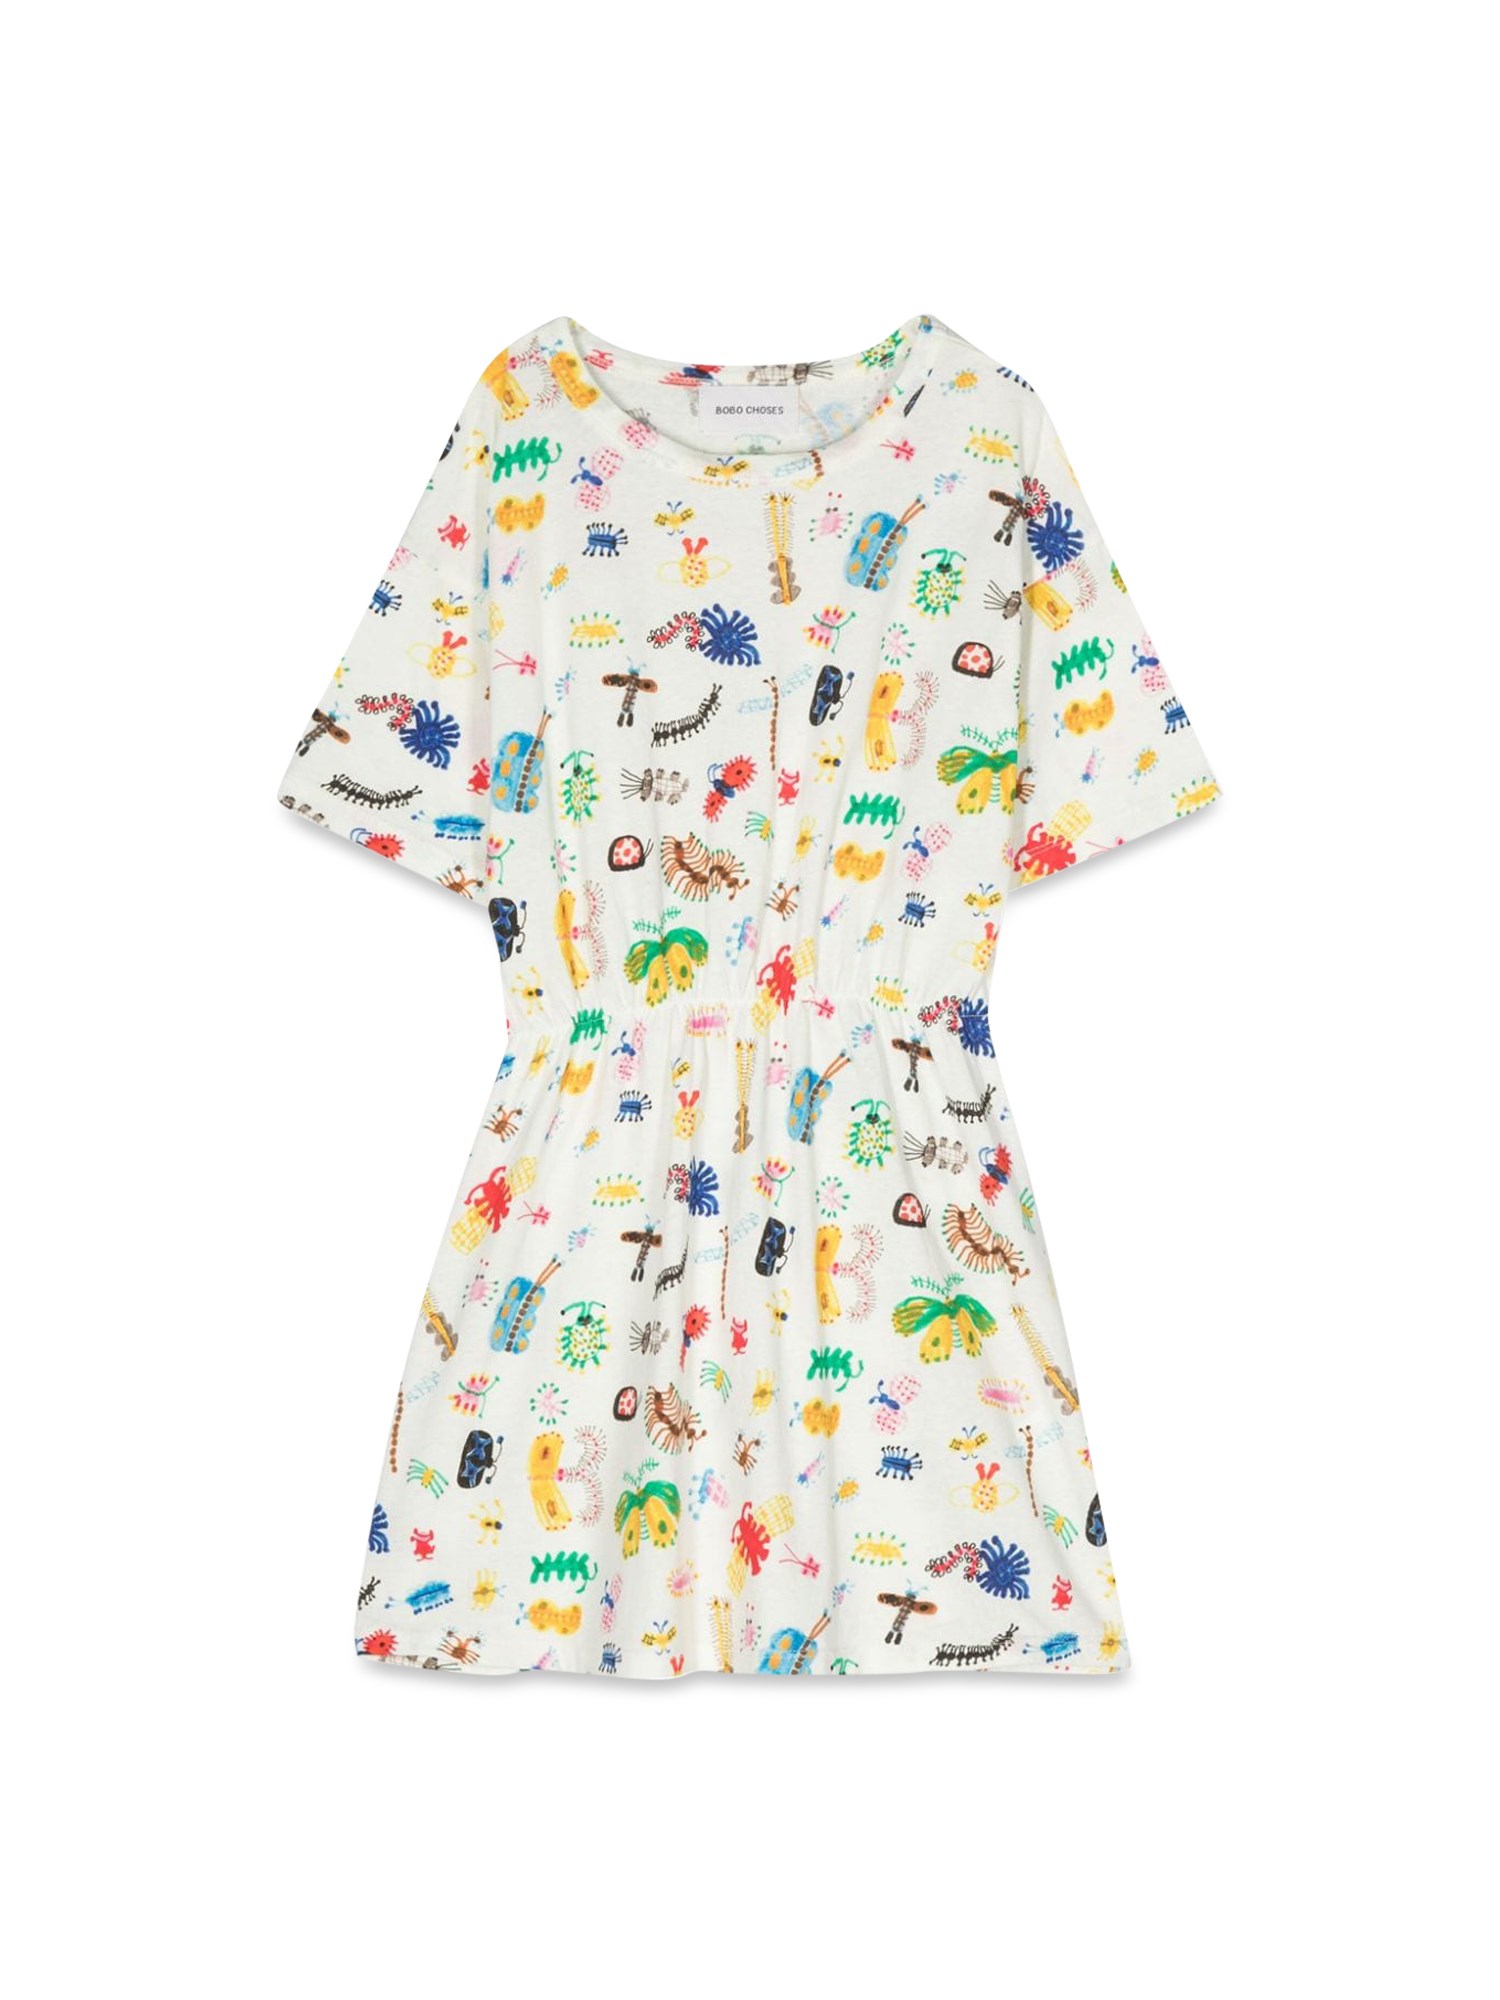 Bobo Choses bobo choses funny insects all over dress